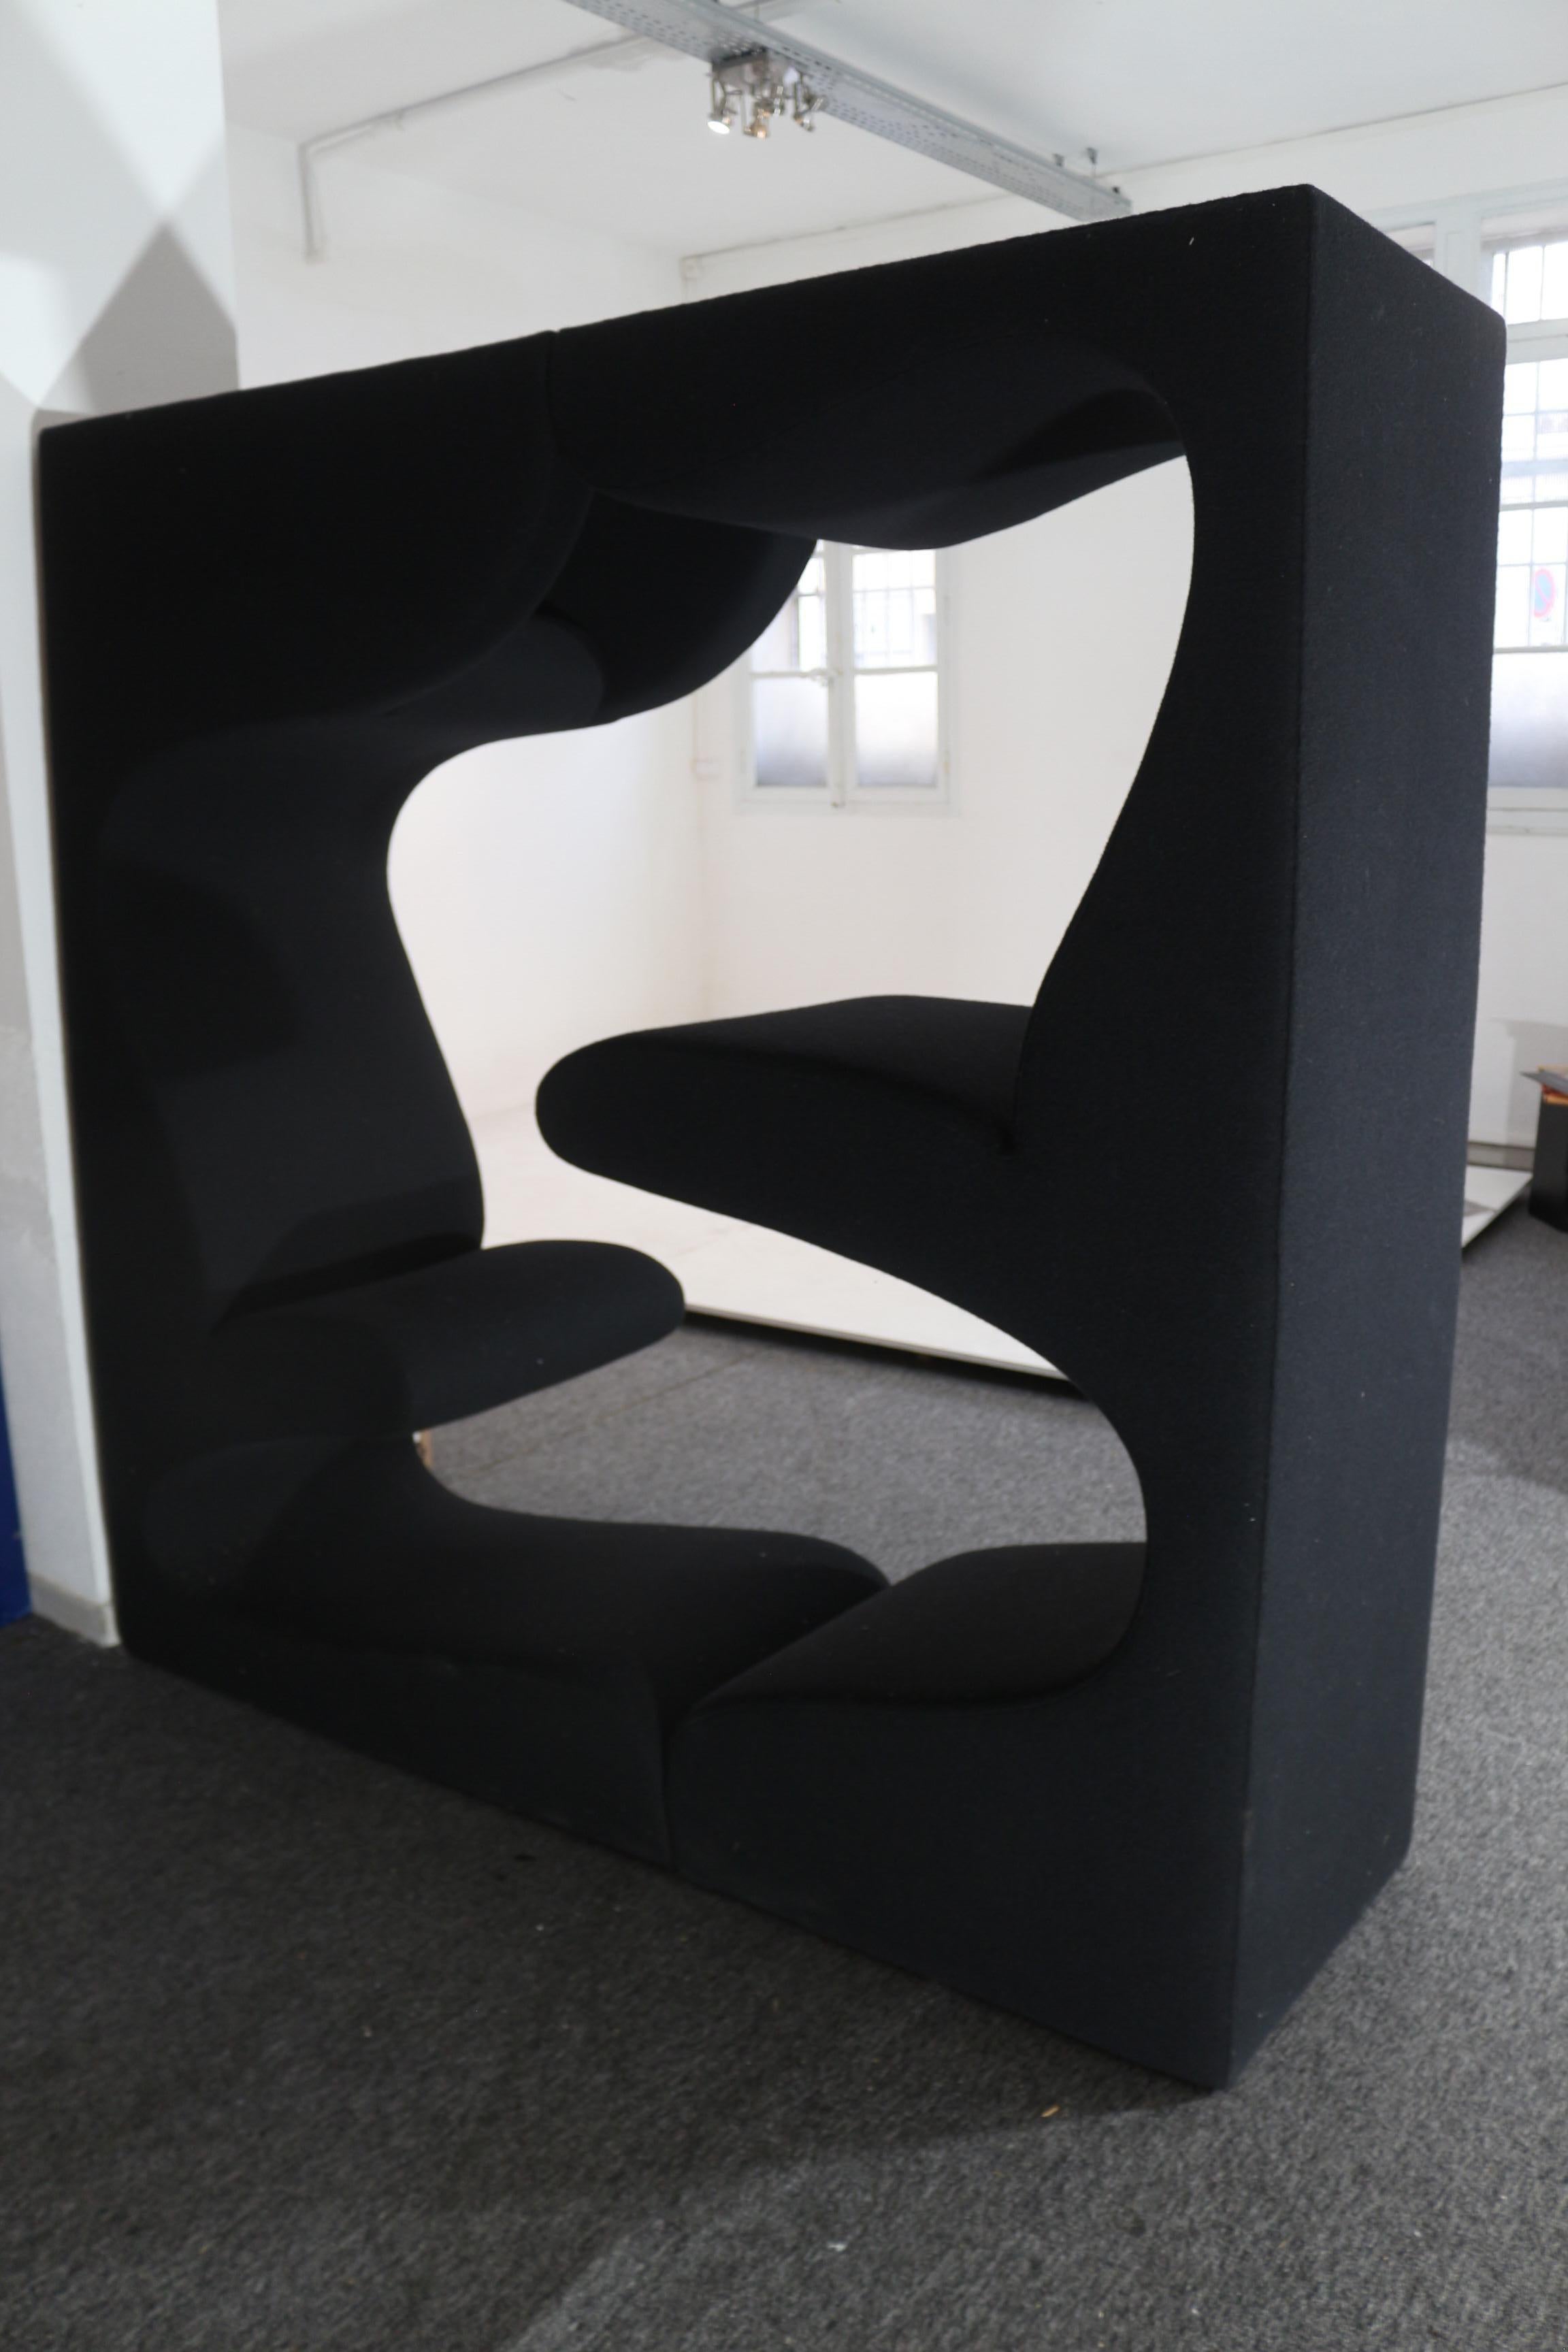 Sculptural armchair designed by Verner Panton.
Very rare edition in this black colour made for Vitra Design Museum 
It is new. Used for exhibition.

Originally designed in 1969, and probably the most famous piece of Space Age furniture ever